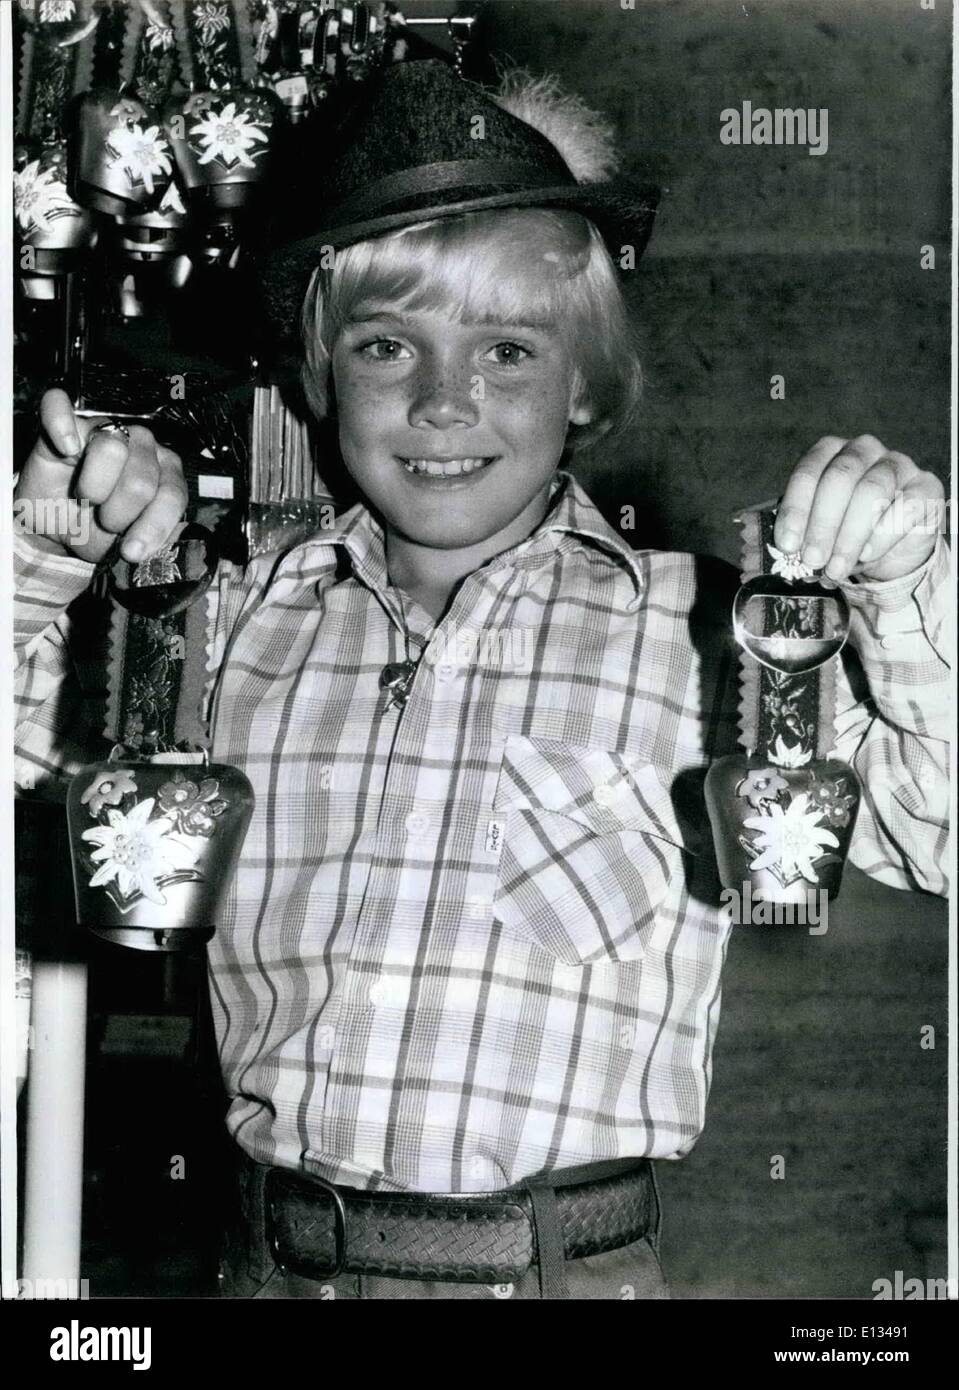 Feb. 28, 2012 - The children star from USA at all nine year at hurried on shed Vie ''Champ'', . his newest file. this strik produeed by the famous film-director Franco Zexfirelli will start an the 26th October ,1979 in Wet Germany. The fair-haired freckled Ricky who was selected out of 2000 candidates is the ''Champ'' the son of an growing old professional fighter who try a comeback for the sake of his junior who admire him very much and his fondest wish is that his daddy will be back again as a brightful winner in teh ring Stock Photo